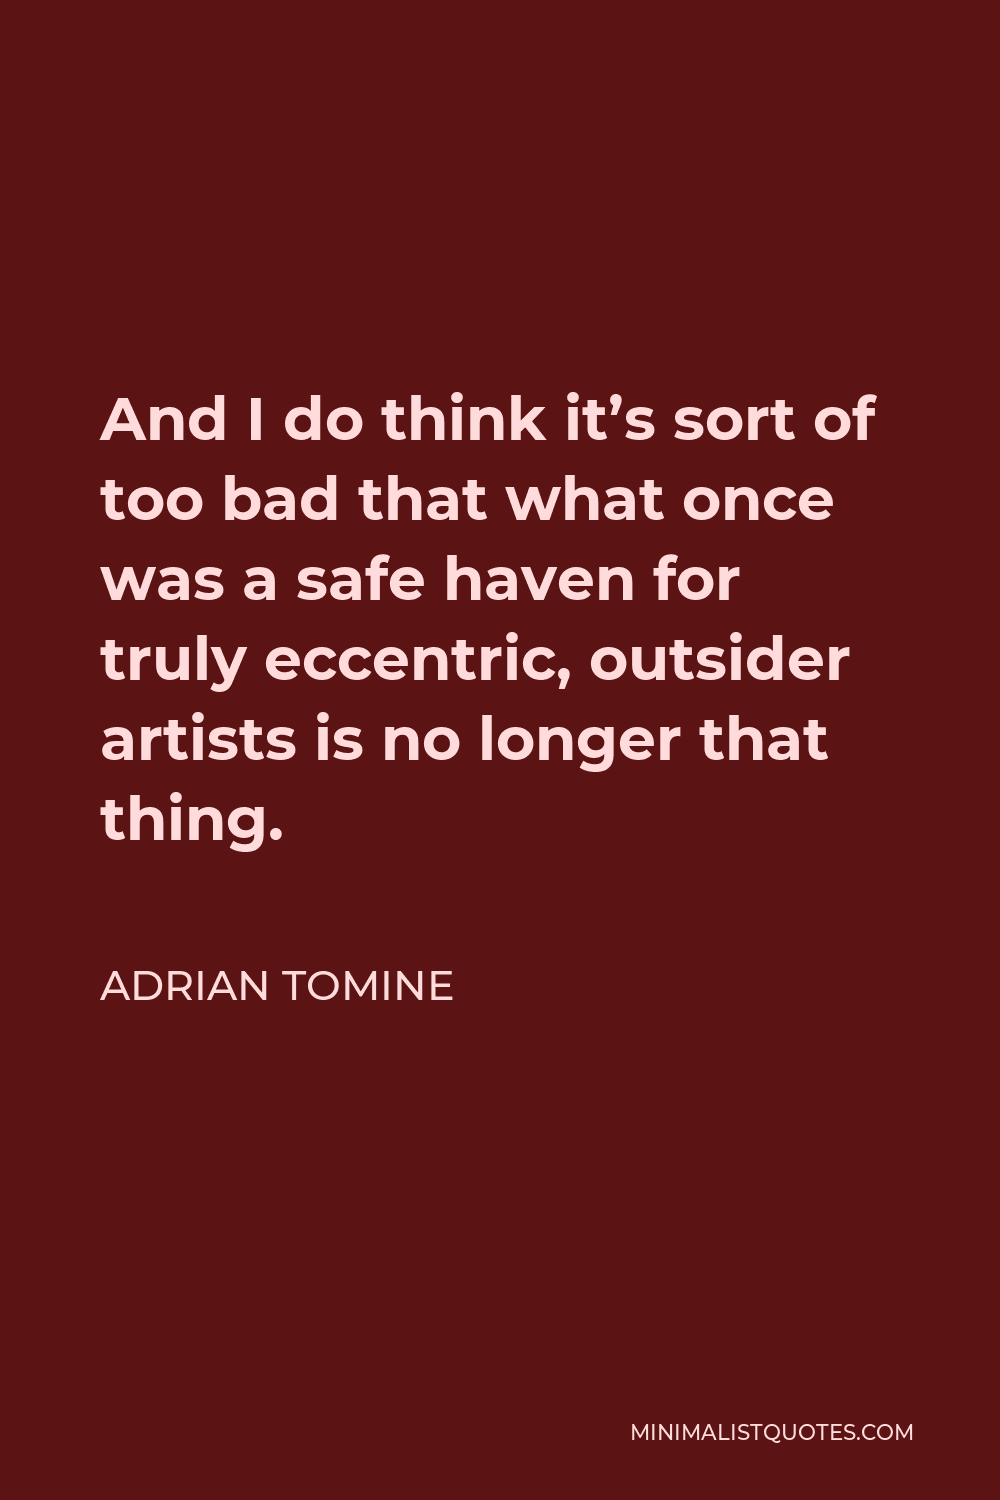 Adrian Tomine Quote - And I do think it’s sort of too bad that what once was a safe haven for truly eccentric, outsider artists is no longer that thing.